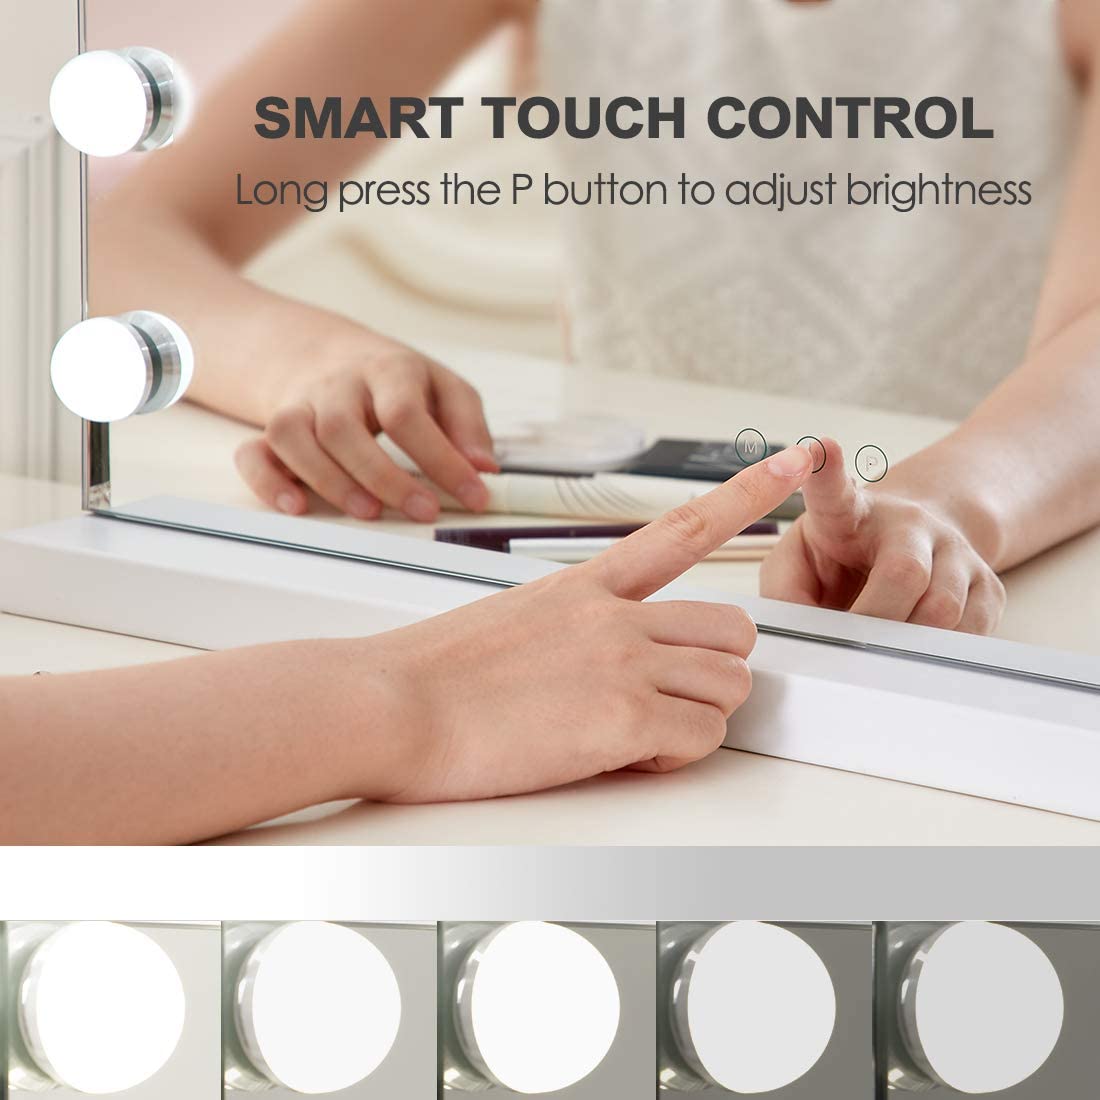 Beauty touch screen makeup mirror led lights bulbs cosmetic make up mirror travel portable led makeup mirror